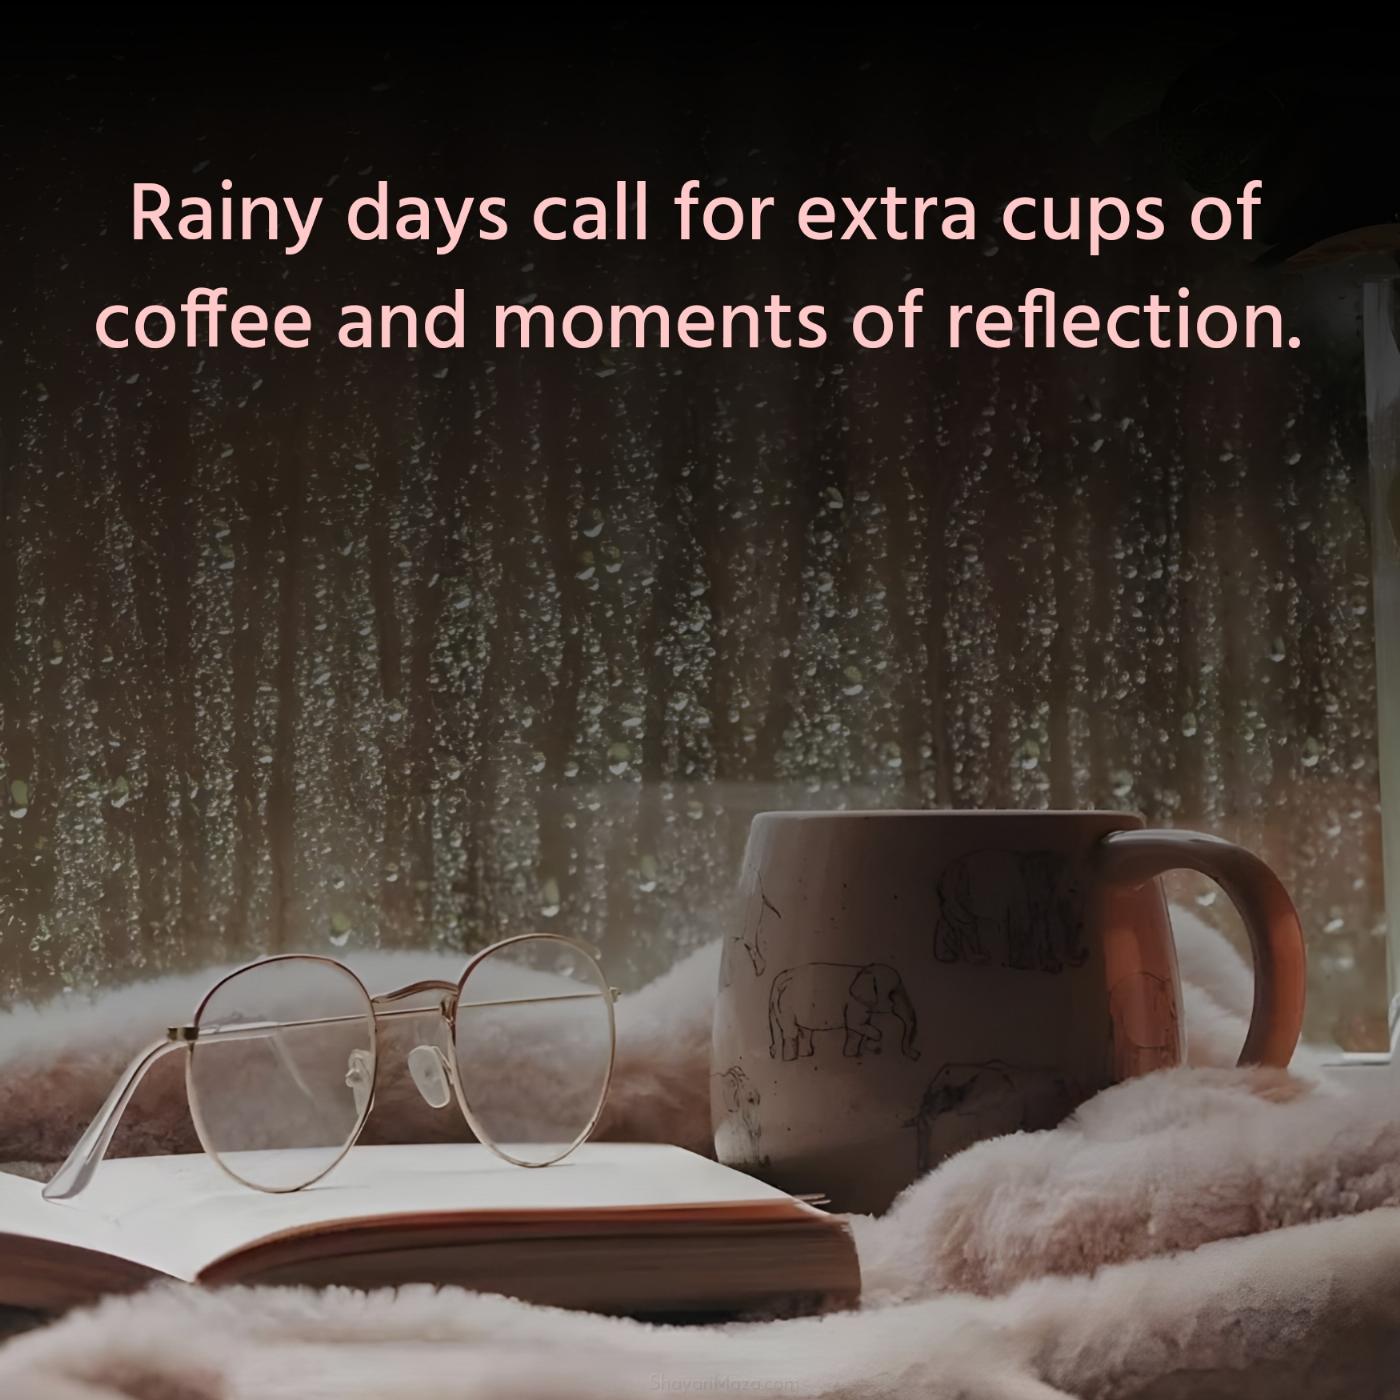 Rainy days call for extra cups of coffee and moments of reflection